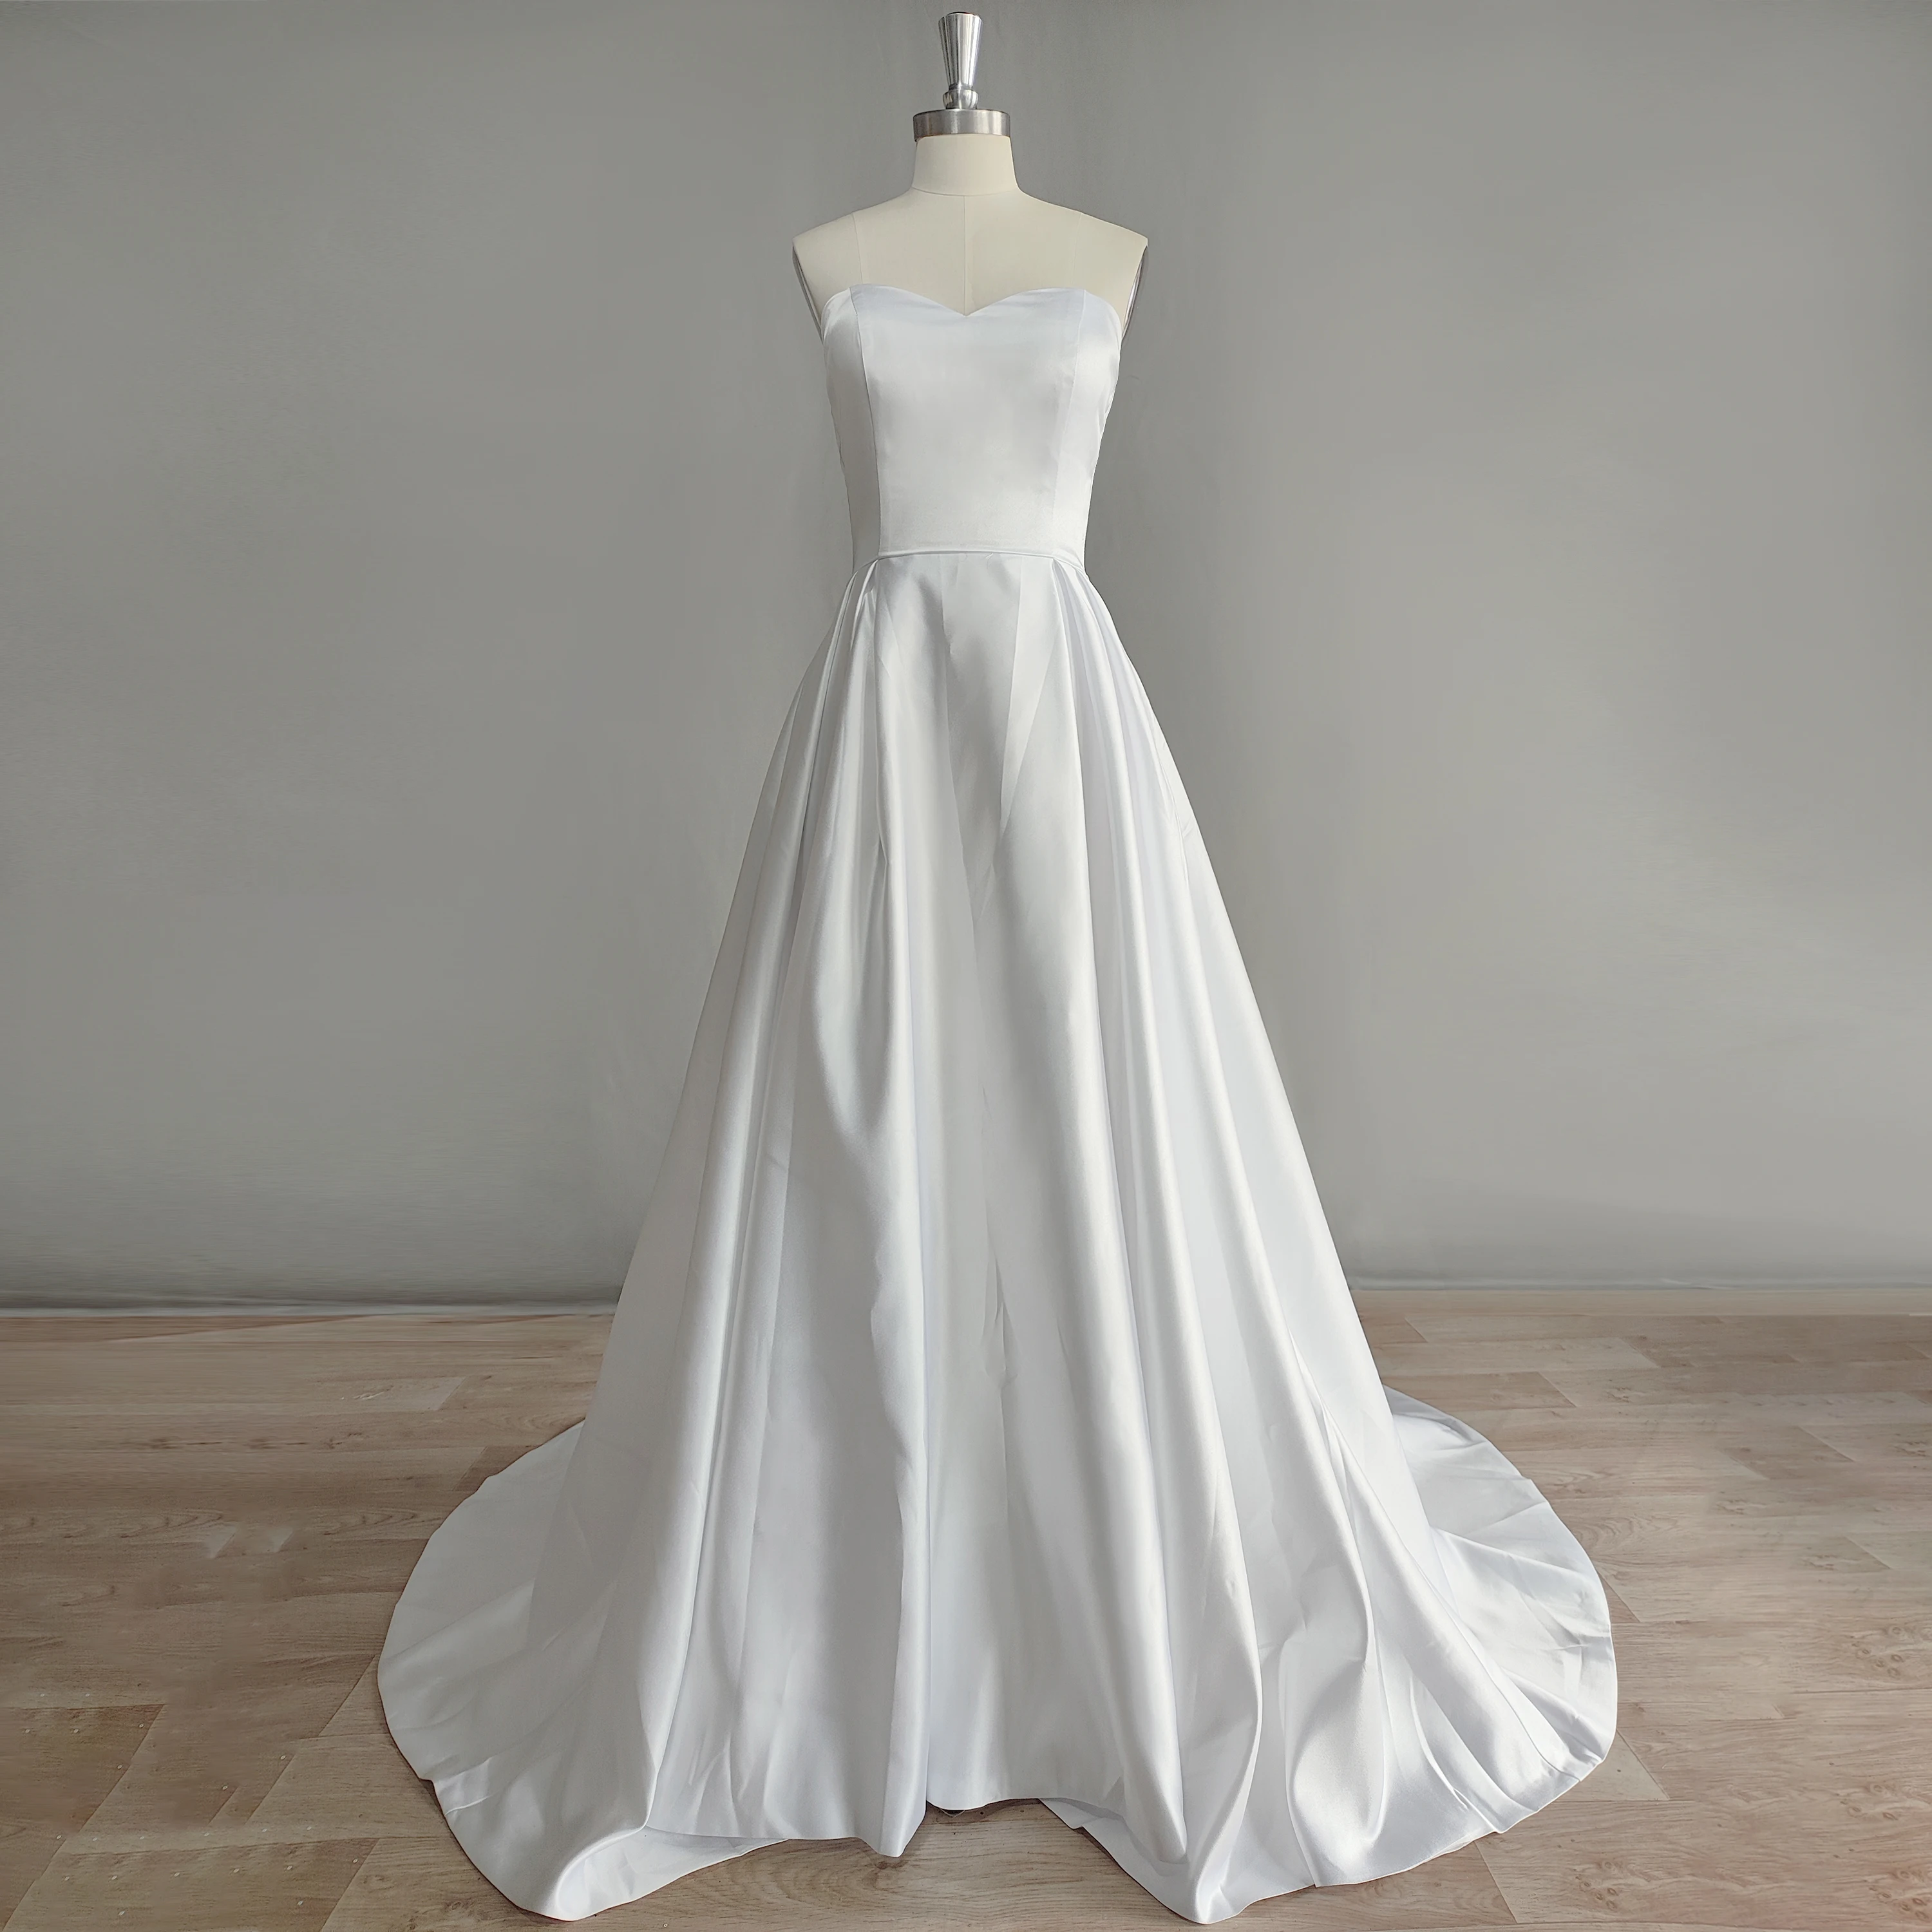 

DIDEYTTAWL Strapless Sweetheart Satin Simple Wedding Dress For Women Real Photos Sleeveless A Line Bridal Gown